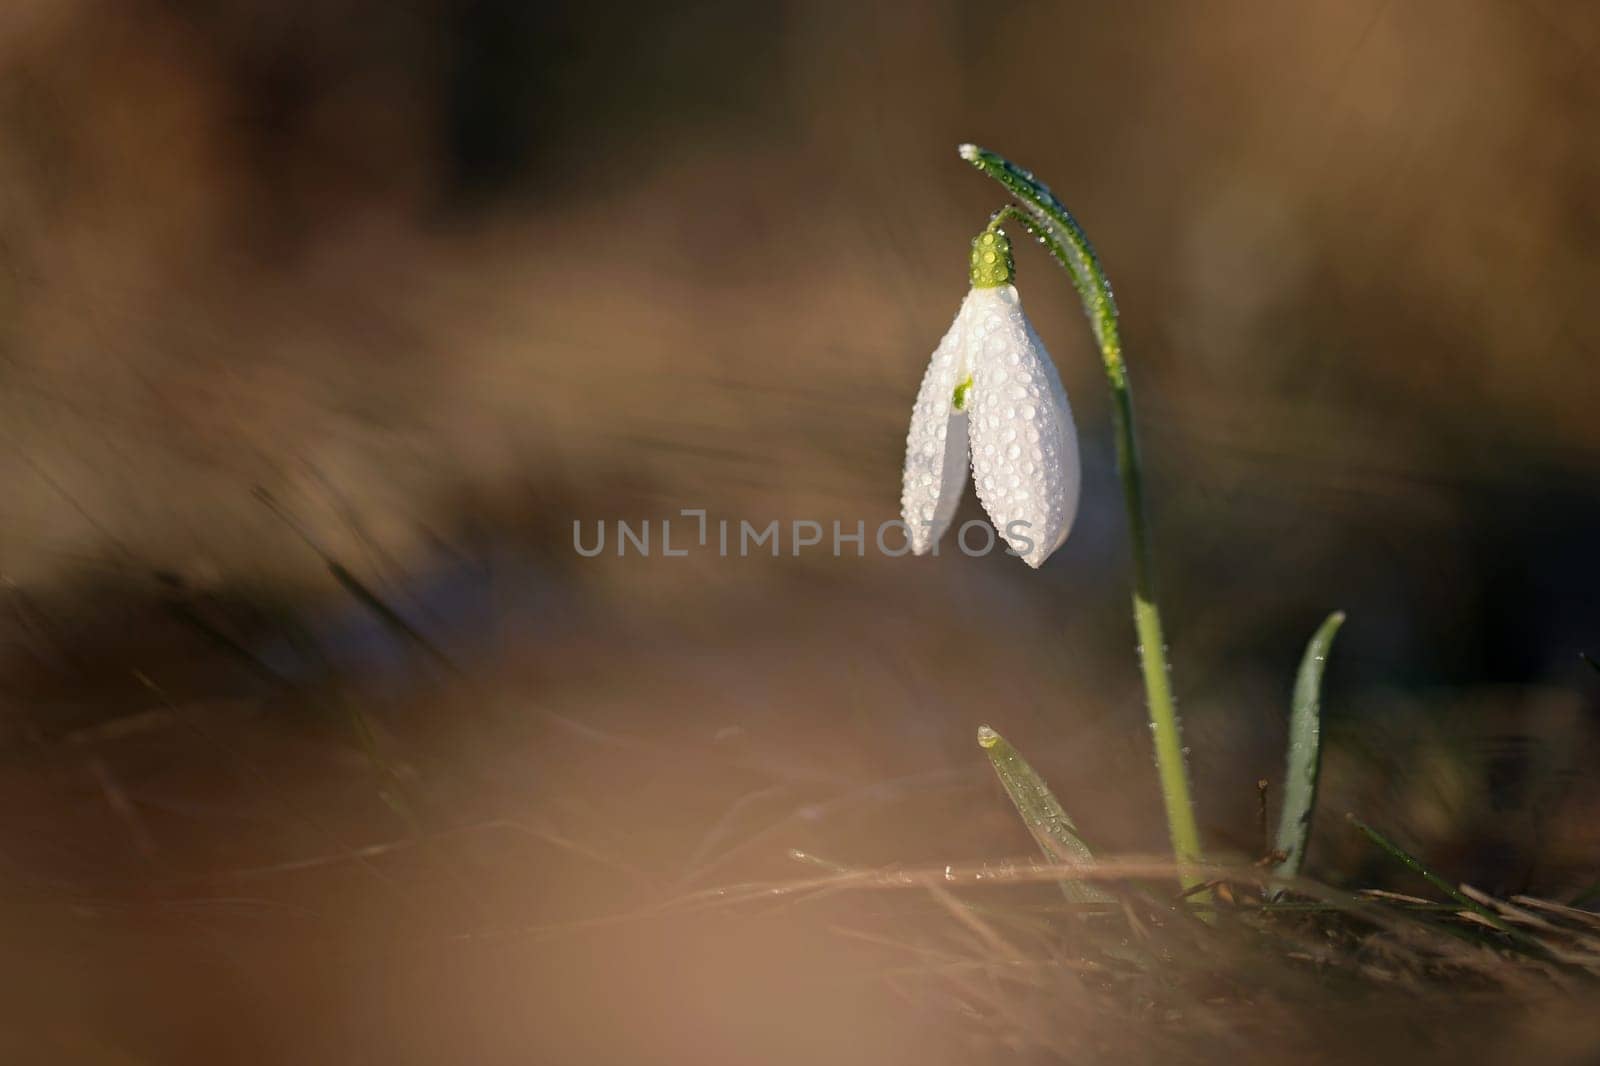 Spring colorful background with flower - plant. Beautiful nature in spring time. Snowdrop (Galanthus nivalis) by Montypeter